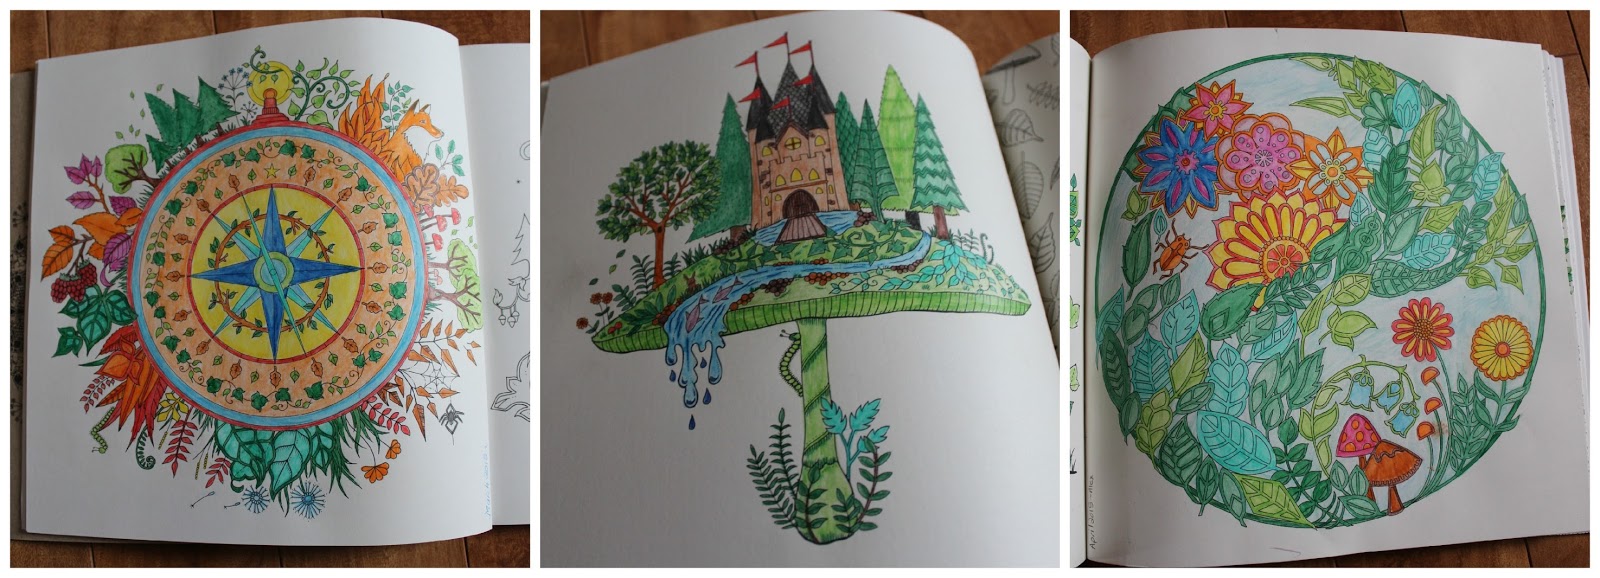 A few pleted pages from Enchanted Forest